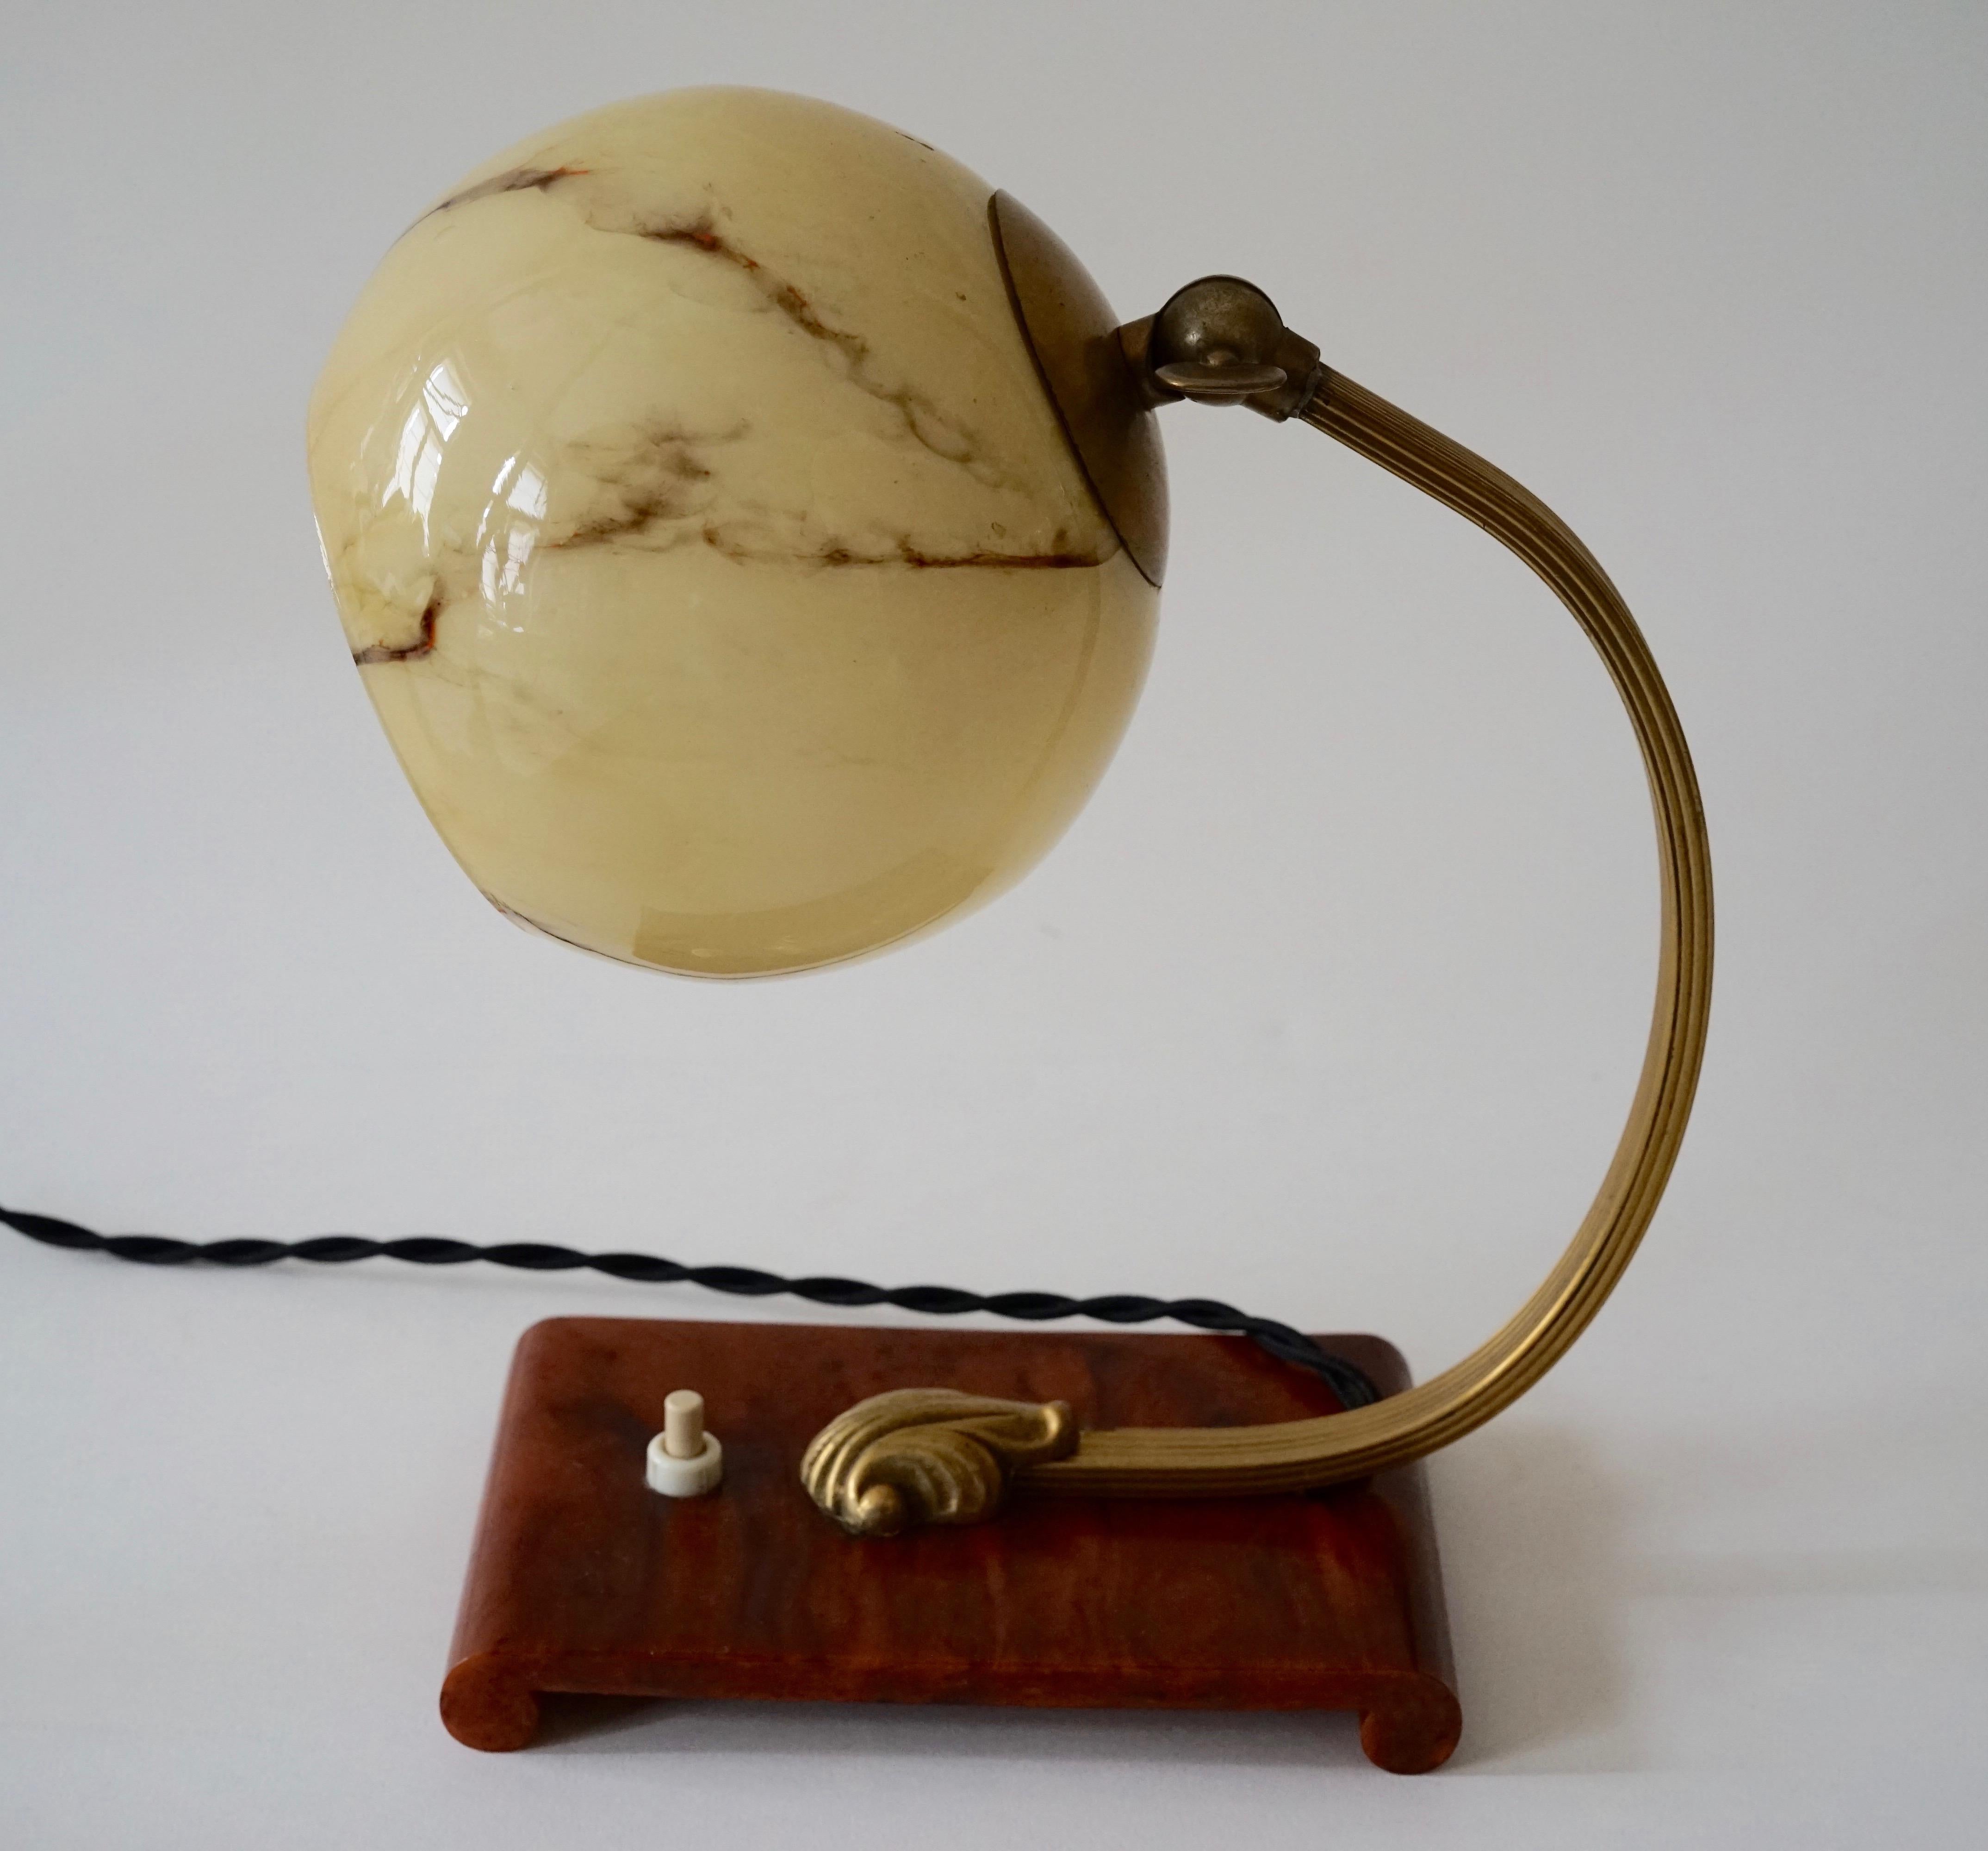 This vintage table or bedside lamp was made in Austria in the 1920s, during the Artdeco period.
The lamp is made of brass with a bakelite base. The shade, is marbleised ,opaline glass and is adjustable.
The electric cable has been replaced with a